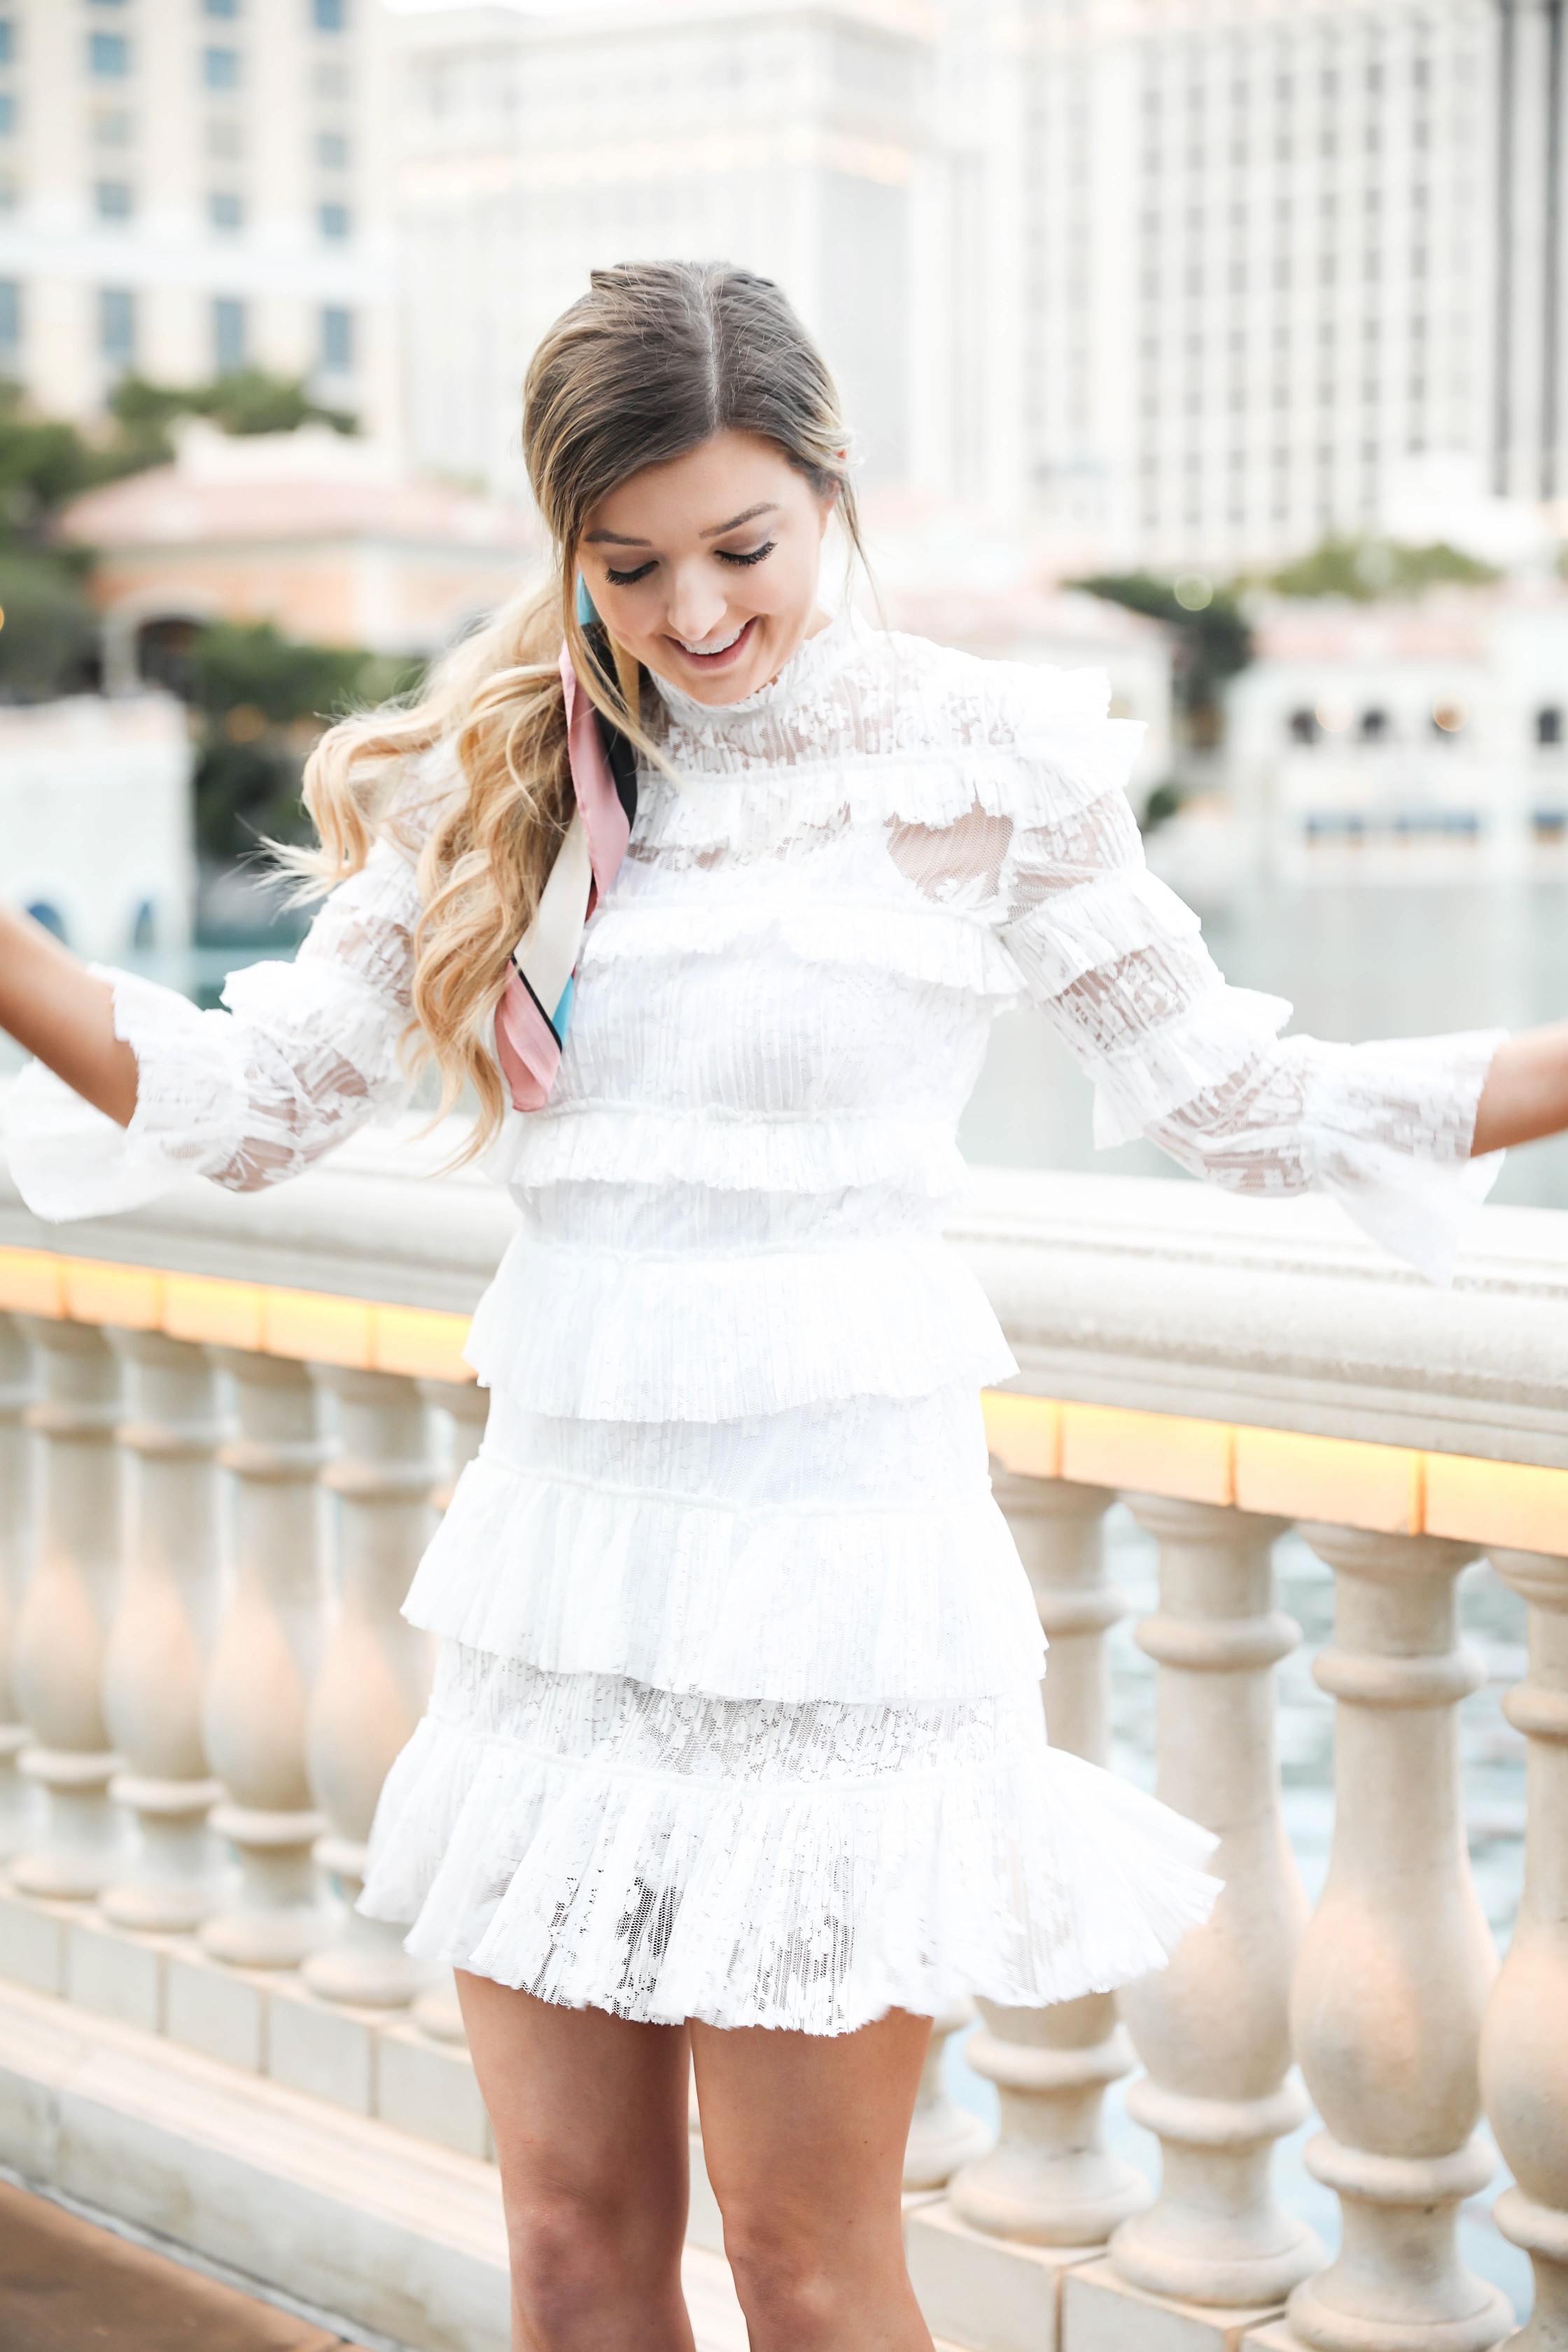 Bellagio fountains in Las Vegas! Wearing a white lace dress and scarf in my pony tail! Las Vegas style! Las vegas blogger! Details on daily dose of charm by lauren lindmark